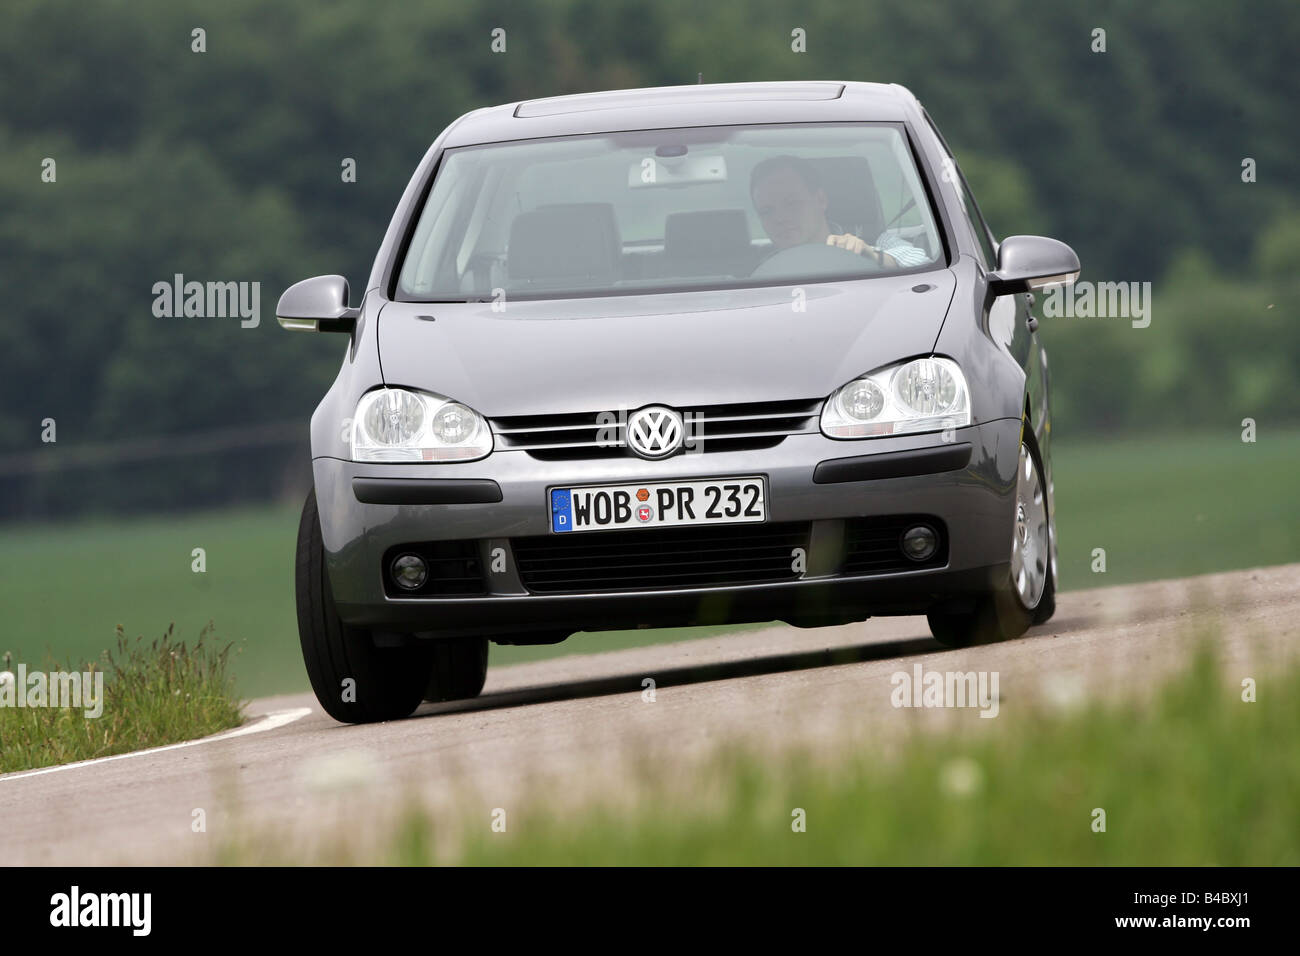 Vw Golf 1 6 Trendline High Resolution Stock Photography and Images - Alamy